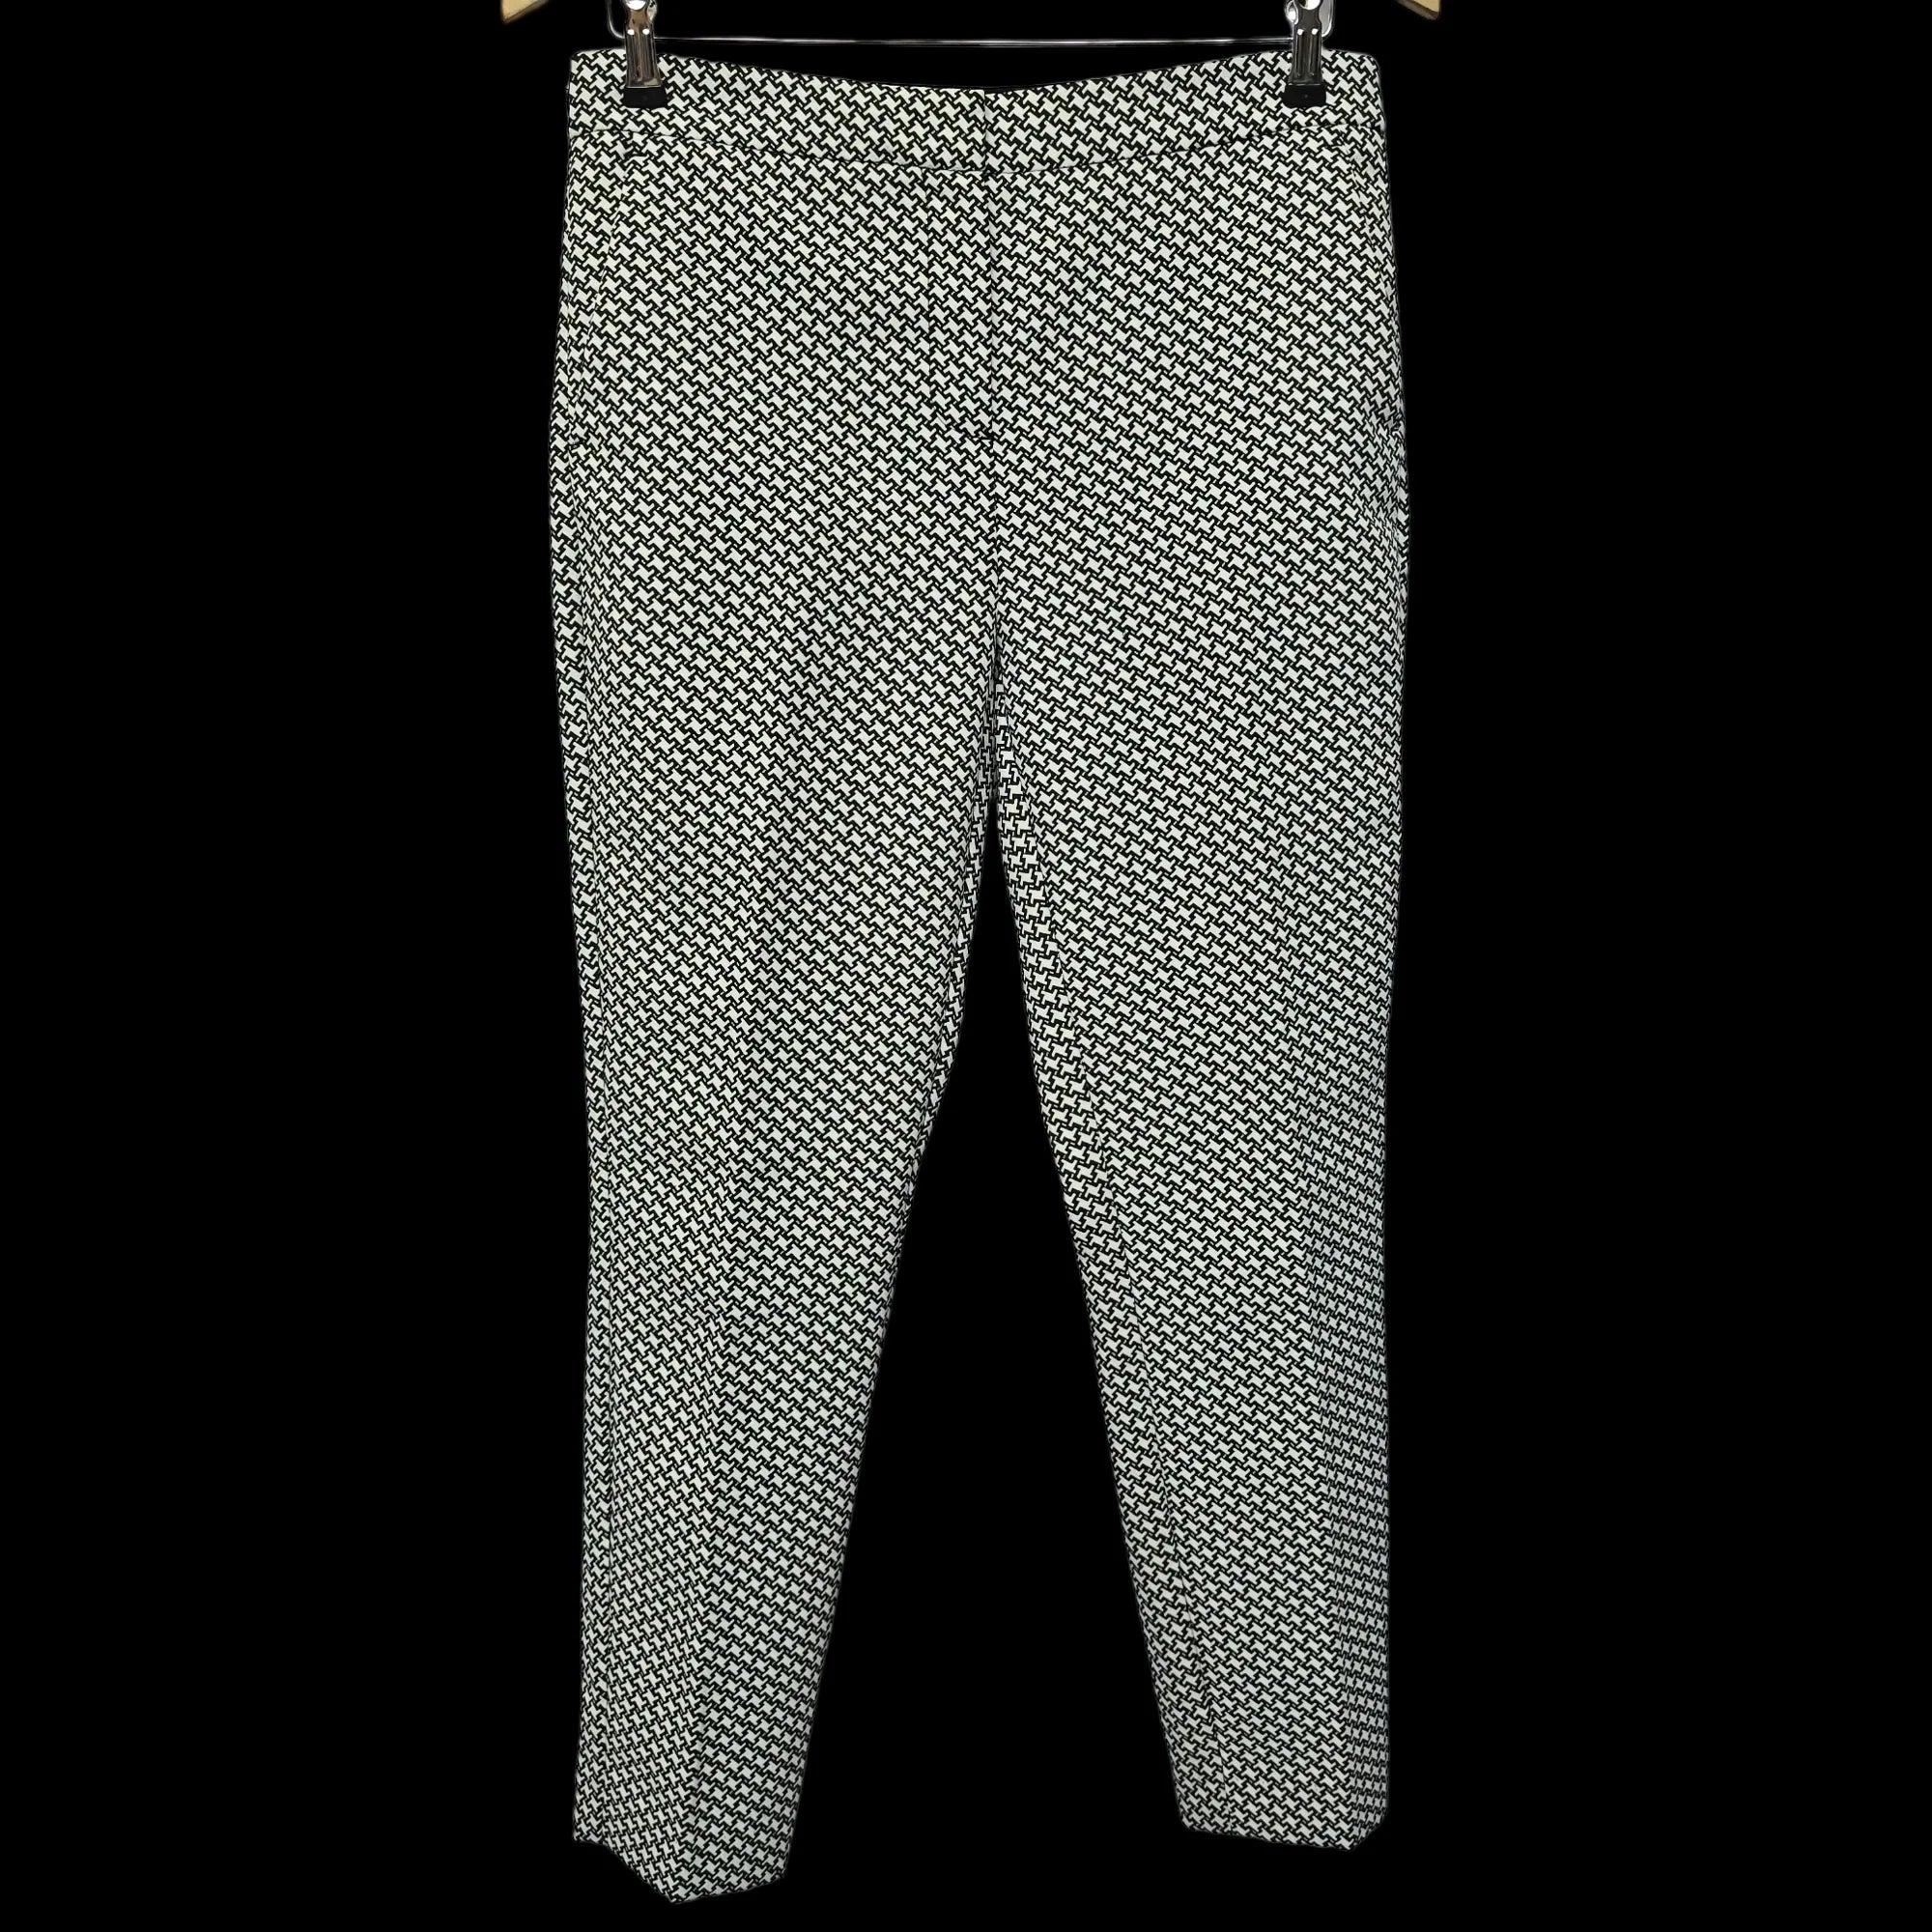 Womens Next Black And White Ankle Trousers UK 10R - 1 - 3598